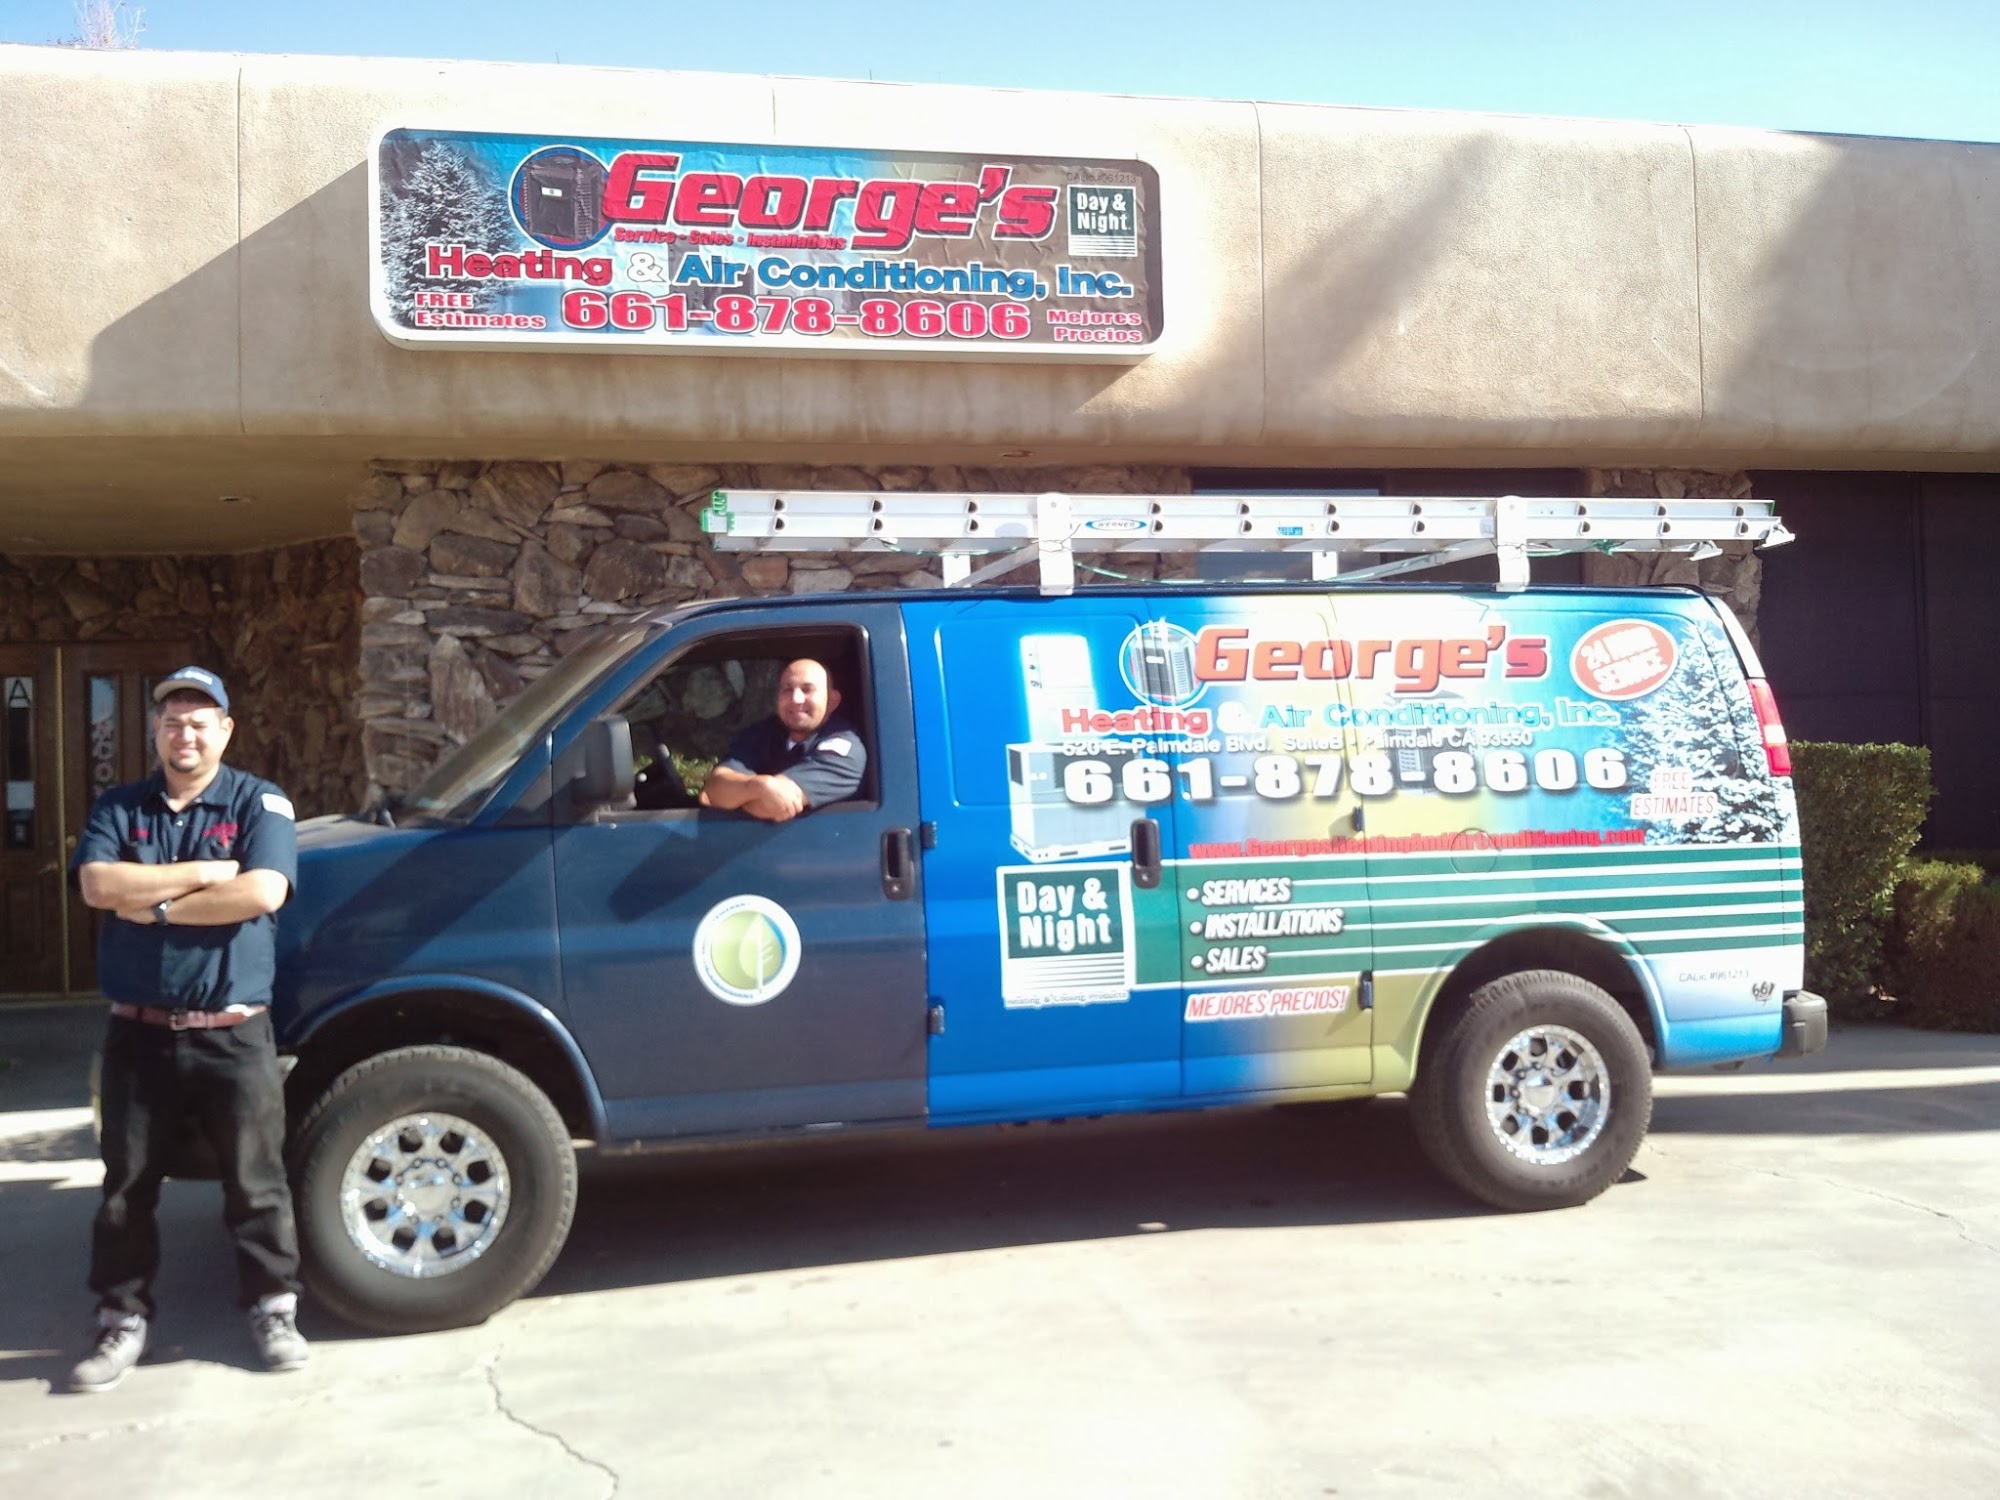 George's Heating & Air Conditioning Inc.